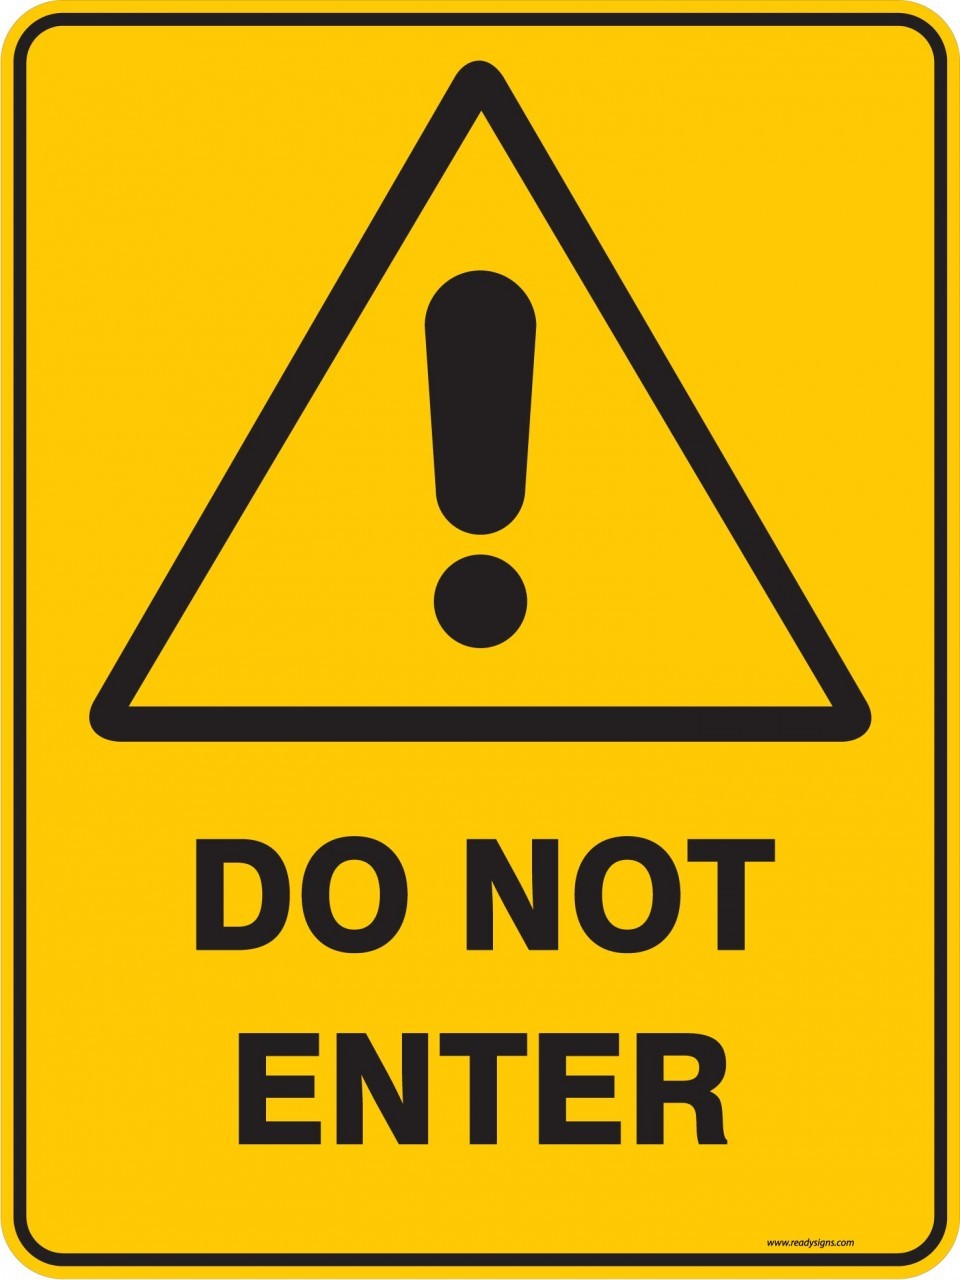 Warning Sign - DO NOT ENTER - Property Signs